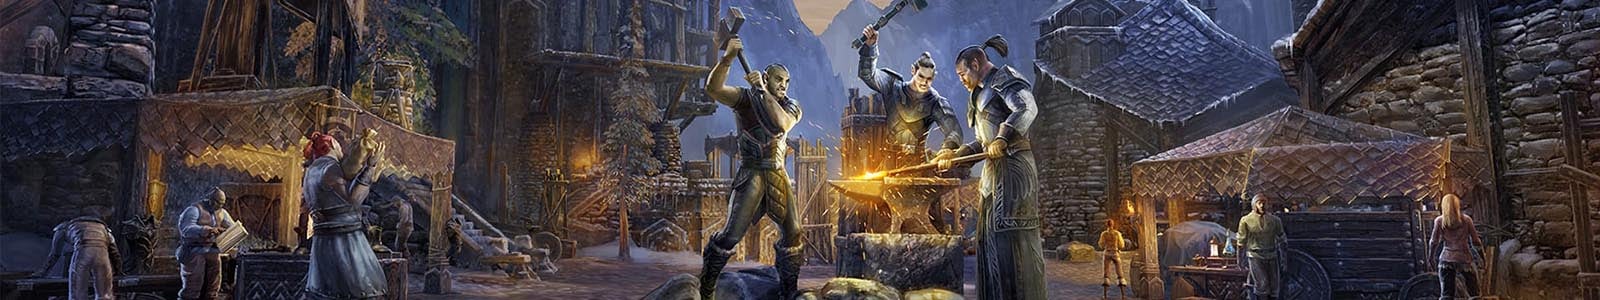 Crafting Guides for ESO header